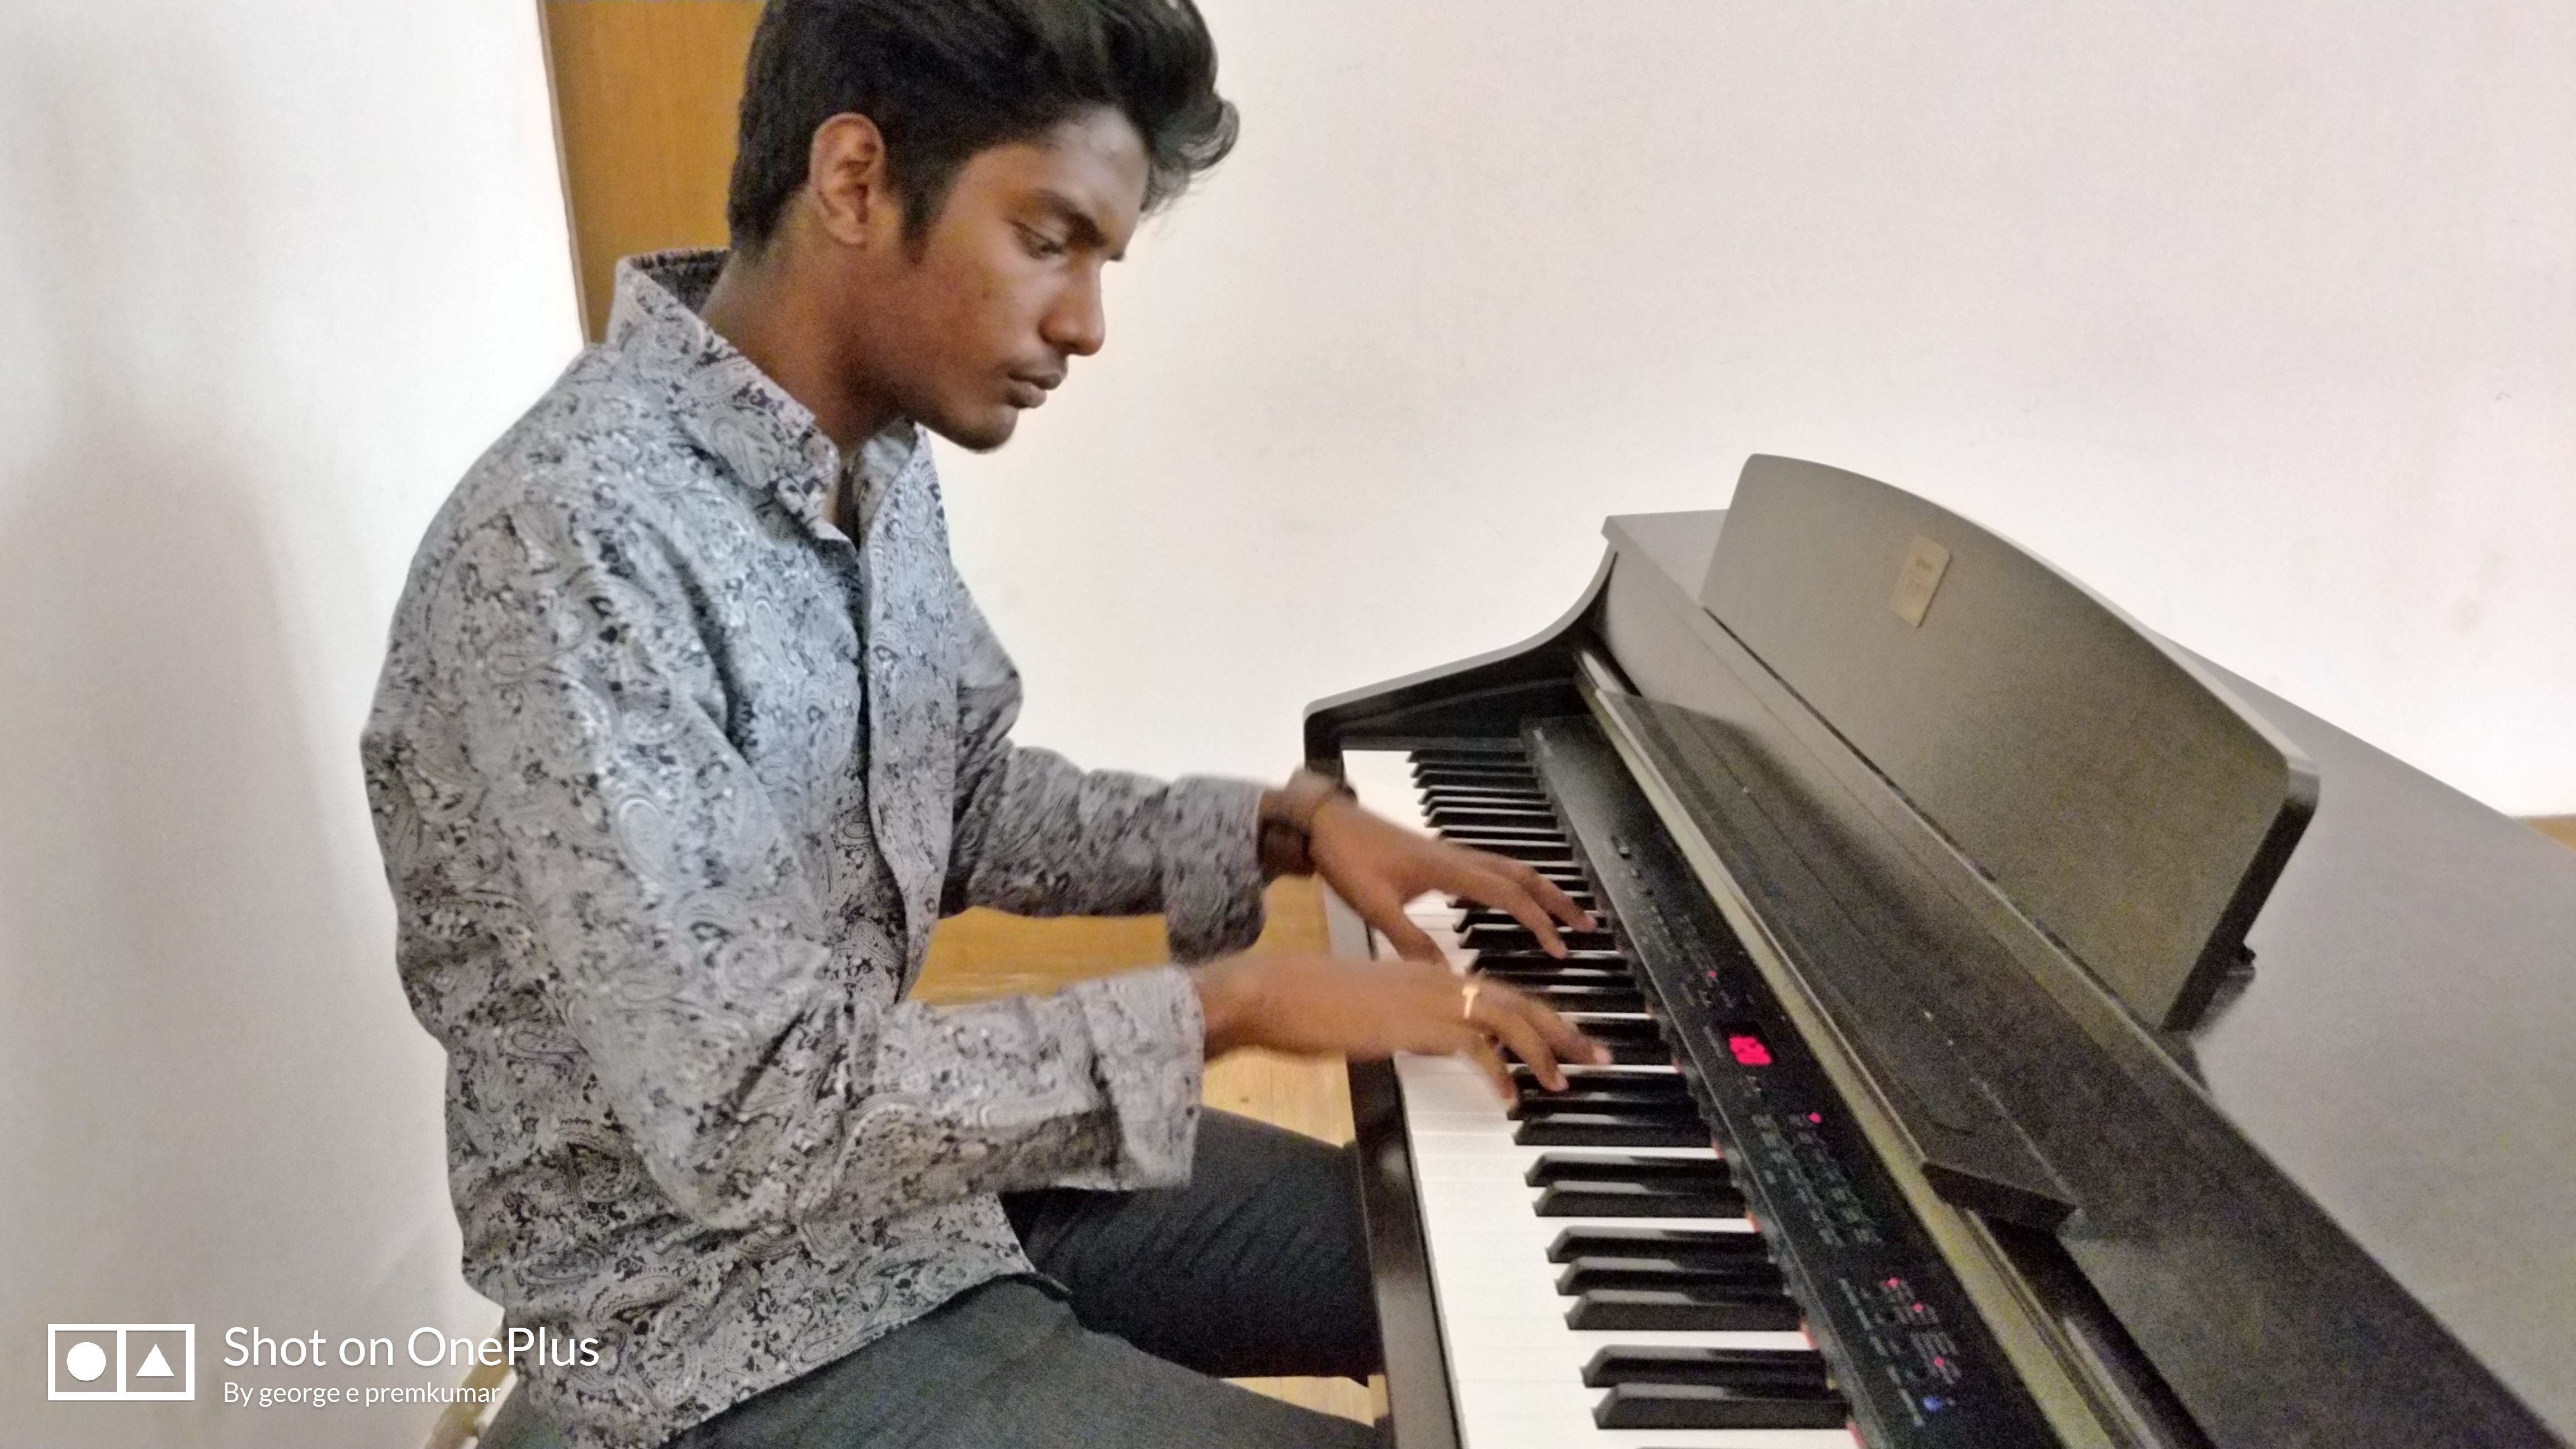 Anup Solomon, playing Piano